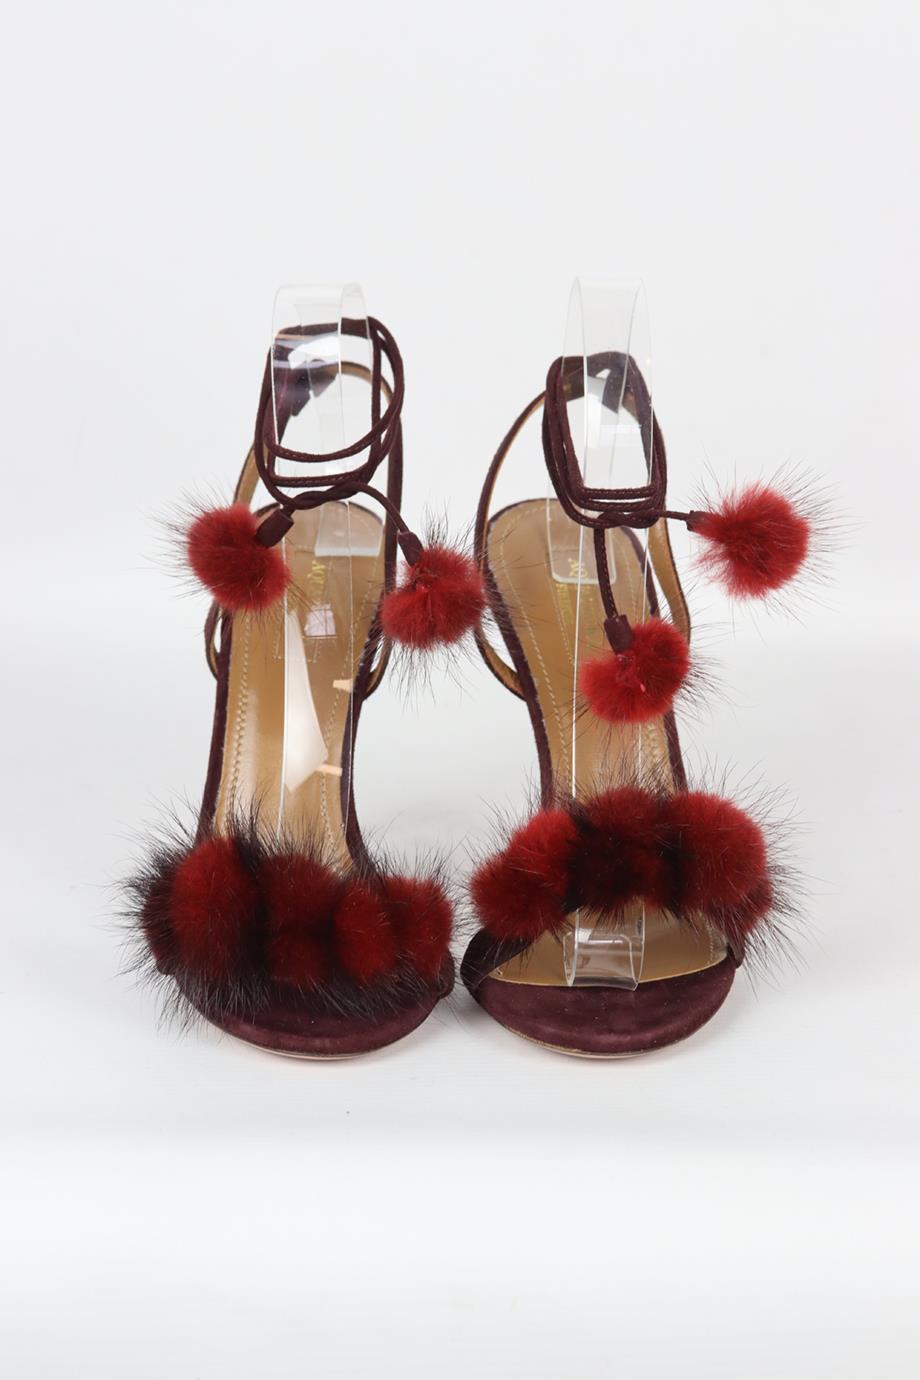 Aquazzura fur trimmed suede sandals. Burgundy. Tie fastening at side. Does not come with dustbag or box. Size: EU 38.5 (UK 5.5, US 8.5). Heel Height: 3 in. Insole: 9.5 in. Very good condition - Worn once. Light wear to soles; see pictures